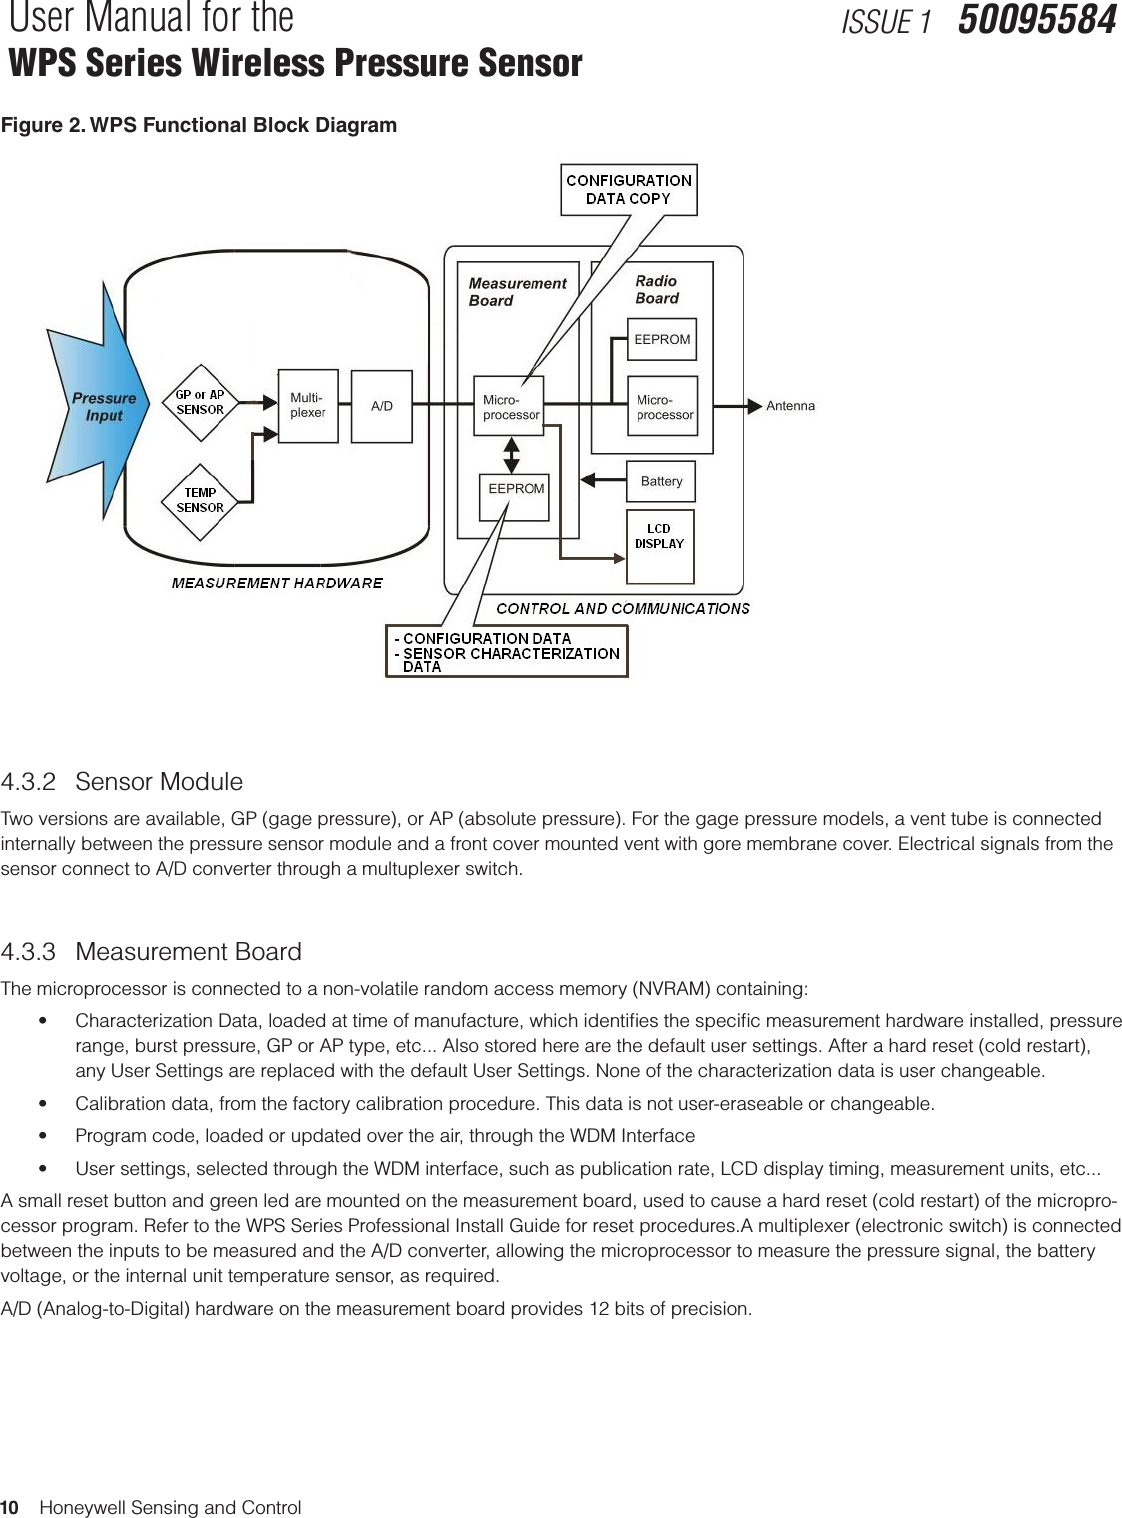 10    Honeywell Sensing and ControlUser Manual for the WPS Series Wireless Pressure SensorISSUE 1   50095584Figure 2. WPS Functional Block Diagram4.3.2  Sensor ModuleTwo versions are available, GP (gage pressure), or AP (absolute pressure). For the gage pressure models, a vent tube is connected internally between the pressure sensor module and a front cover mounted vent with gore membrane cover. Electrical signals from the sensor connect to A/D converter through a multuplexer switch.4.3.3  Measurement BoardThe microprocessor is connected to a non-volatile random access memory (NVRAM) containing:•  Characterization Data, loaded at time of manufacture, which identiﬁes the speciﬁc measurement hardware installed, pressure range, burst pressure, GP or AP type, etc... Also stored here are the default user settings. After a hard reset (cold restart), any User Settings are replaced with the default User Settings. None of the characterization data is user changeable.•  Calibration data, from the factory calibration procedure. This data is not user-eraseable or changeable.•  Program code, loaded or updated over the air, through the WDM Interface•  User settings, selected through the WDM interface, such as publication rate, LCD display timing, measurement units, etc...A small reset button and green led are mounted on the measurement board, used to cause a hard reset (cold restart) of the micropro-cessor program. Refer to the WPS Series Professional Install Guide for reset procedures.A multiplexer (electronic switch) is connected between the inputs to be measured and the A/D converter, allowing the microprocessor to measure the pressure signal, the battery voltage, or the internal unit temperature sensor, as required.A/D (Analog-to-Digital) hardware on the measurement board provides 12 bits of precision.